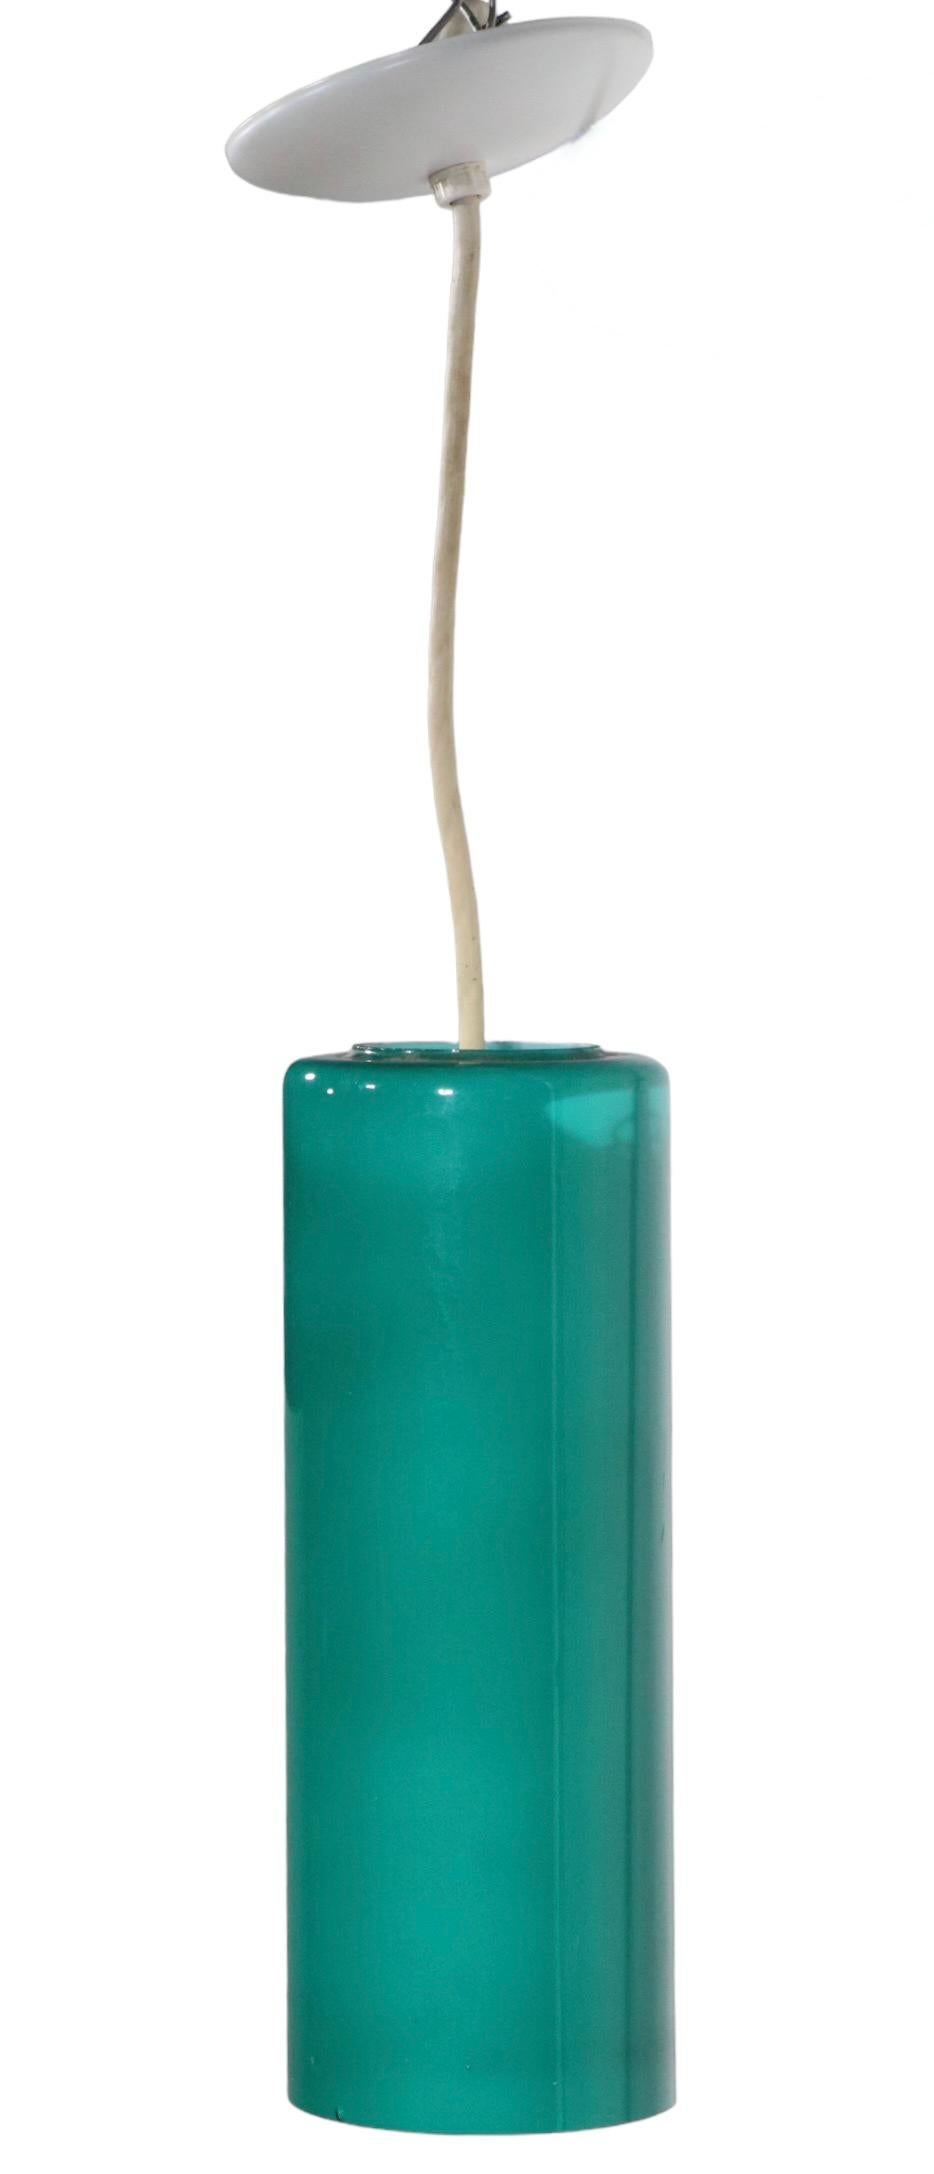 Nice cylinder hanging pendant light fixture in cased green glass with white interior., attributed to Prescolite, circa 1950/1970's.The fixture is in very good, original, clean and working condition, showing on ly one inconsequential flaw at the